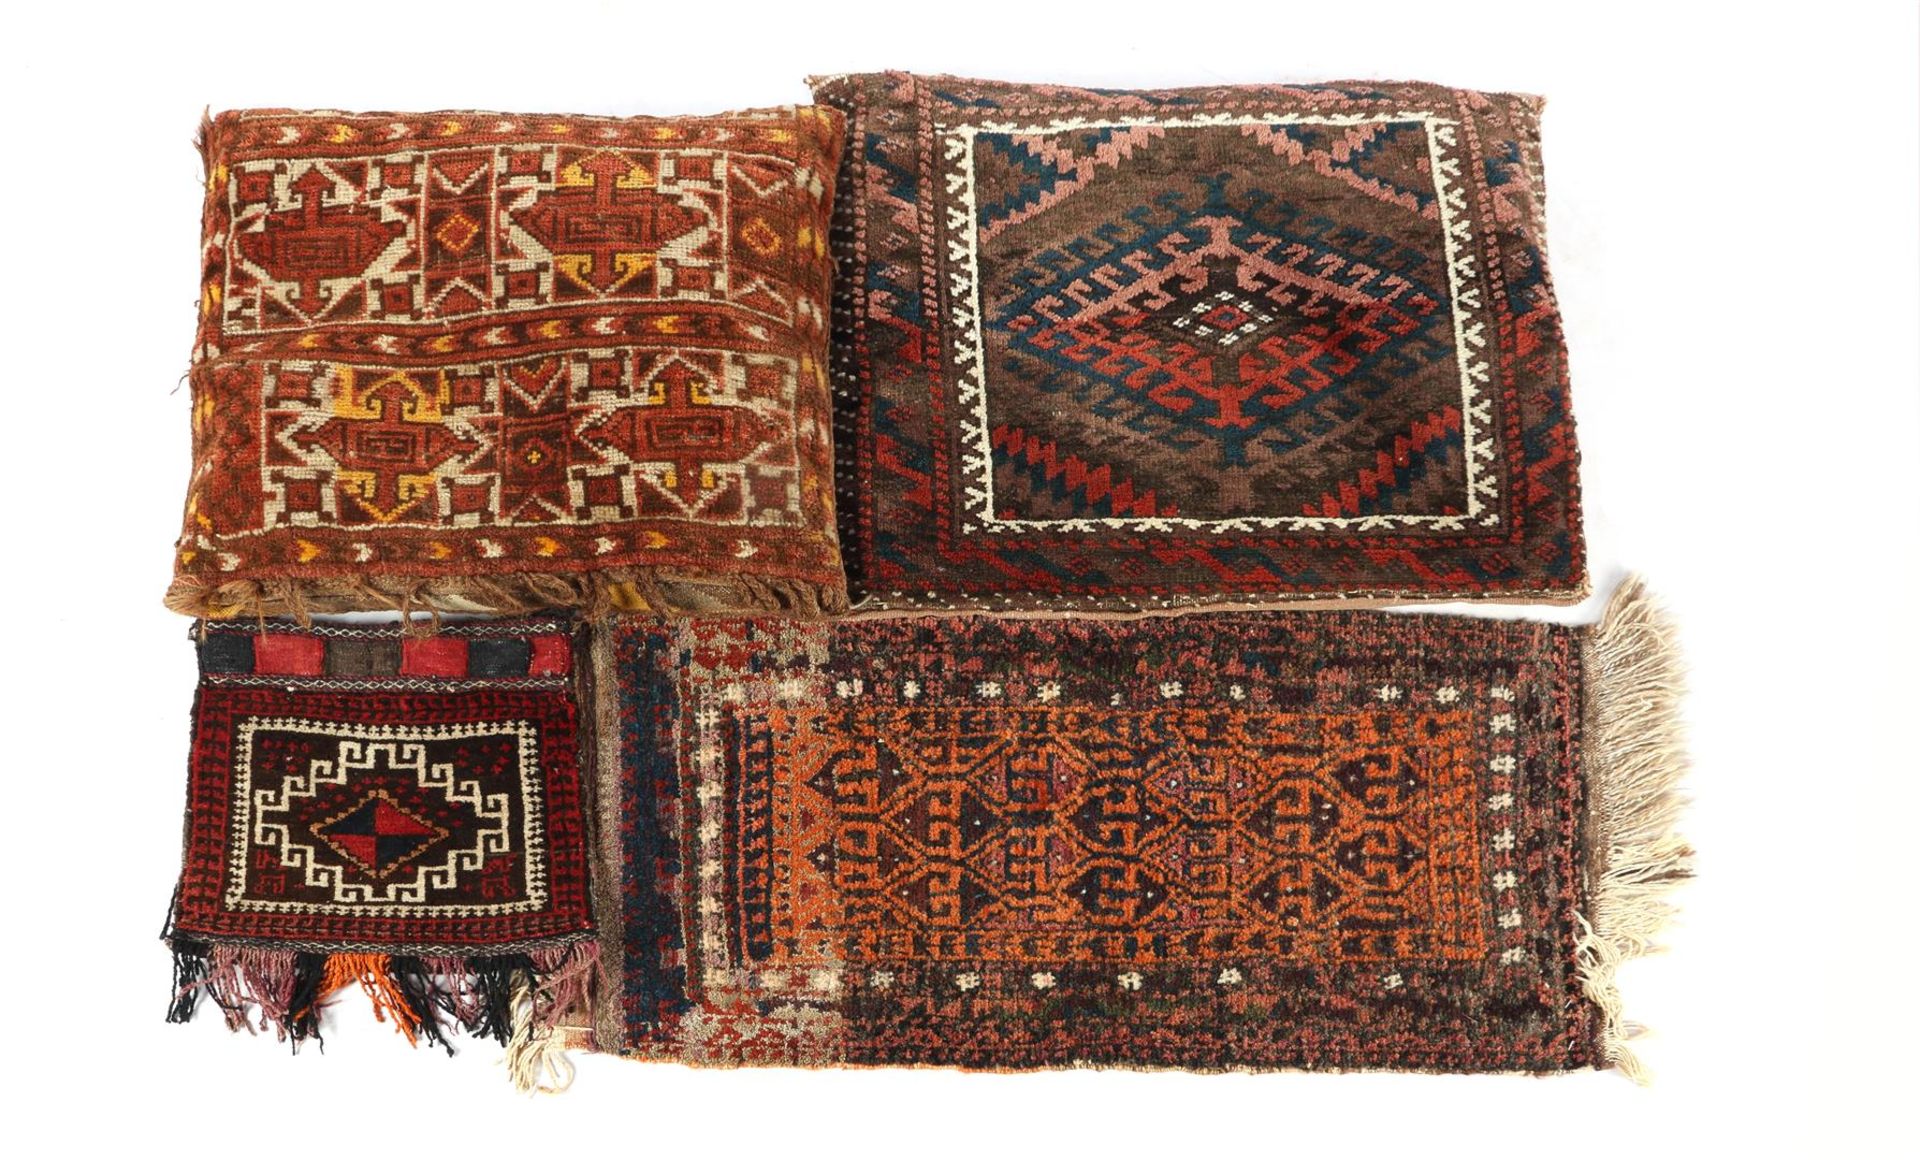 2 hand-knotted pillows